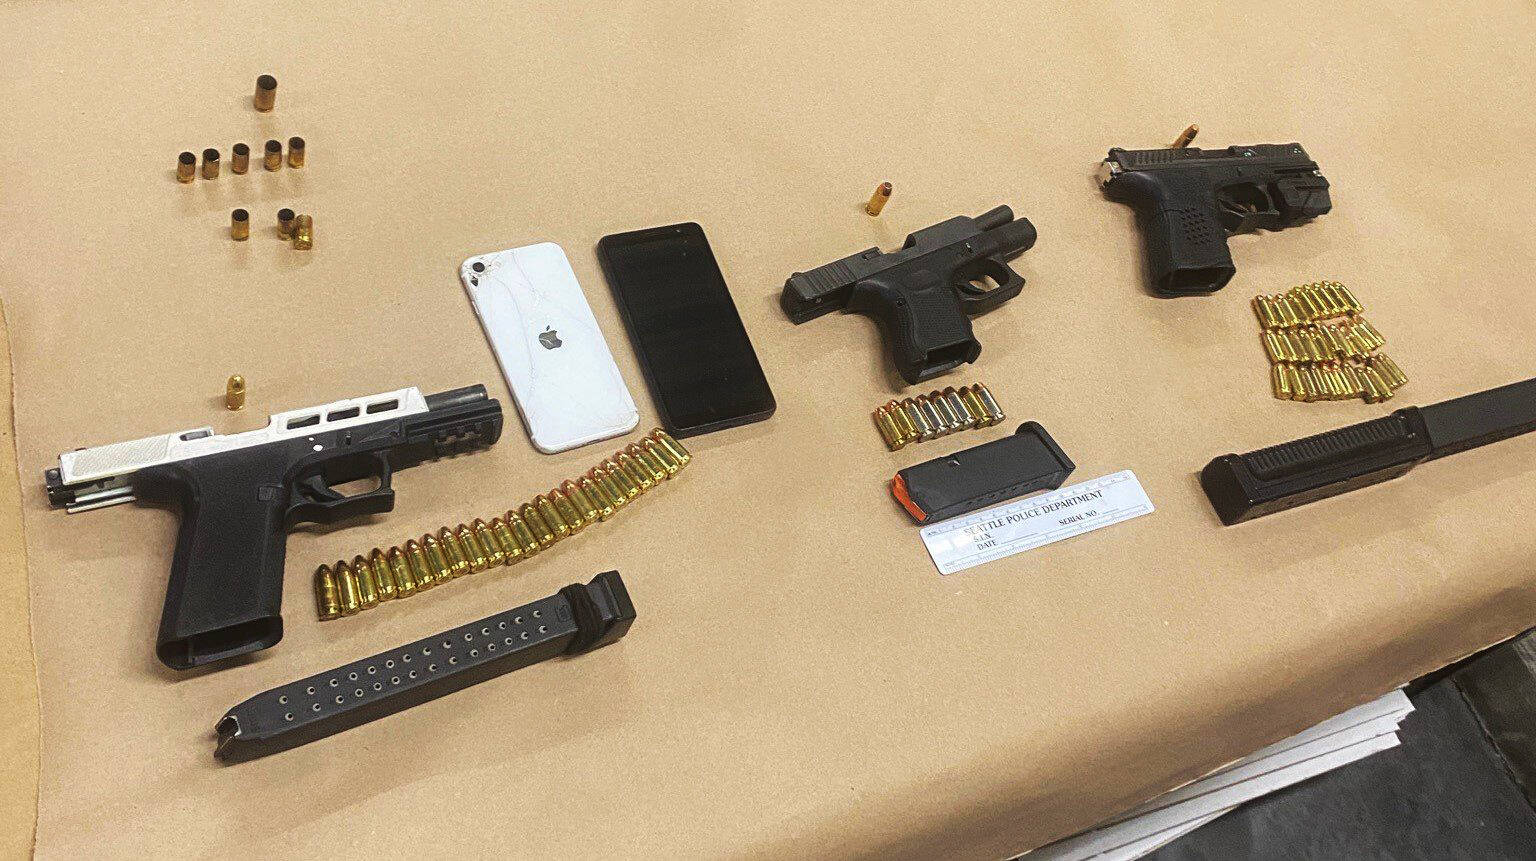 Seattle Police reported they found these guns after the arrest Aug. 16 of two felony suspects in Kent. COURTESY PHOTO, Seattle Police